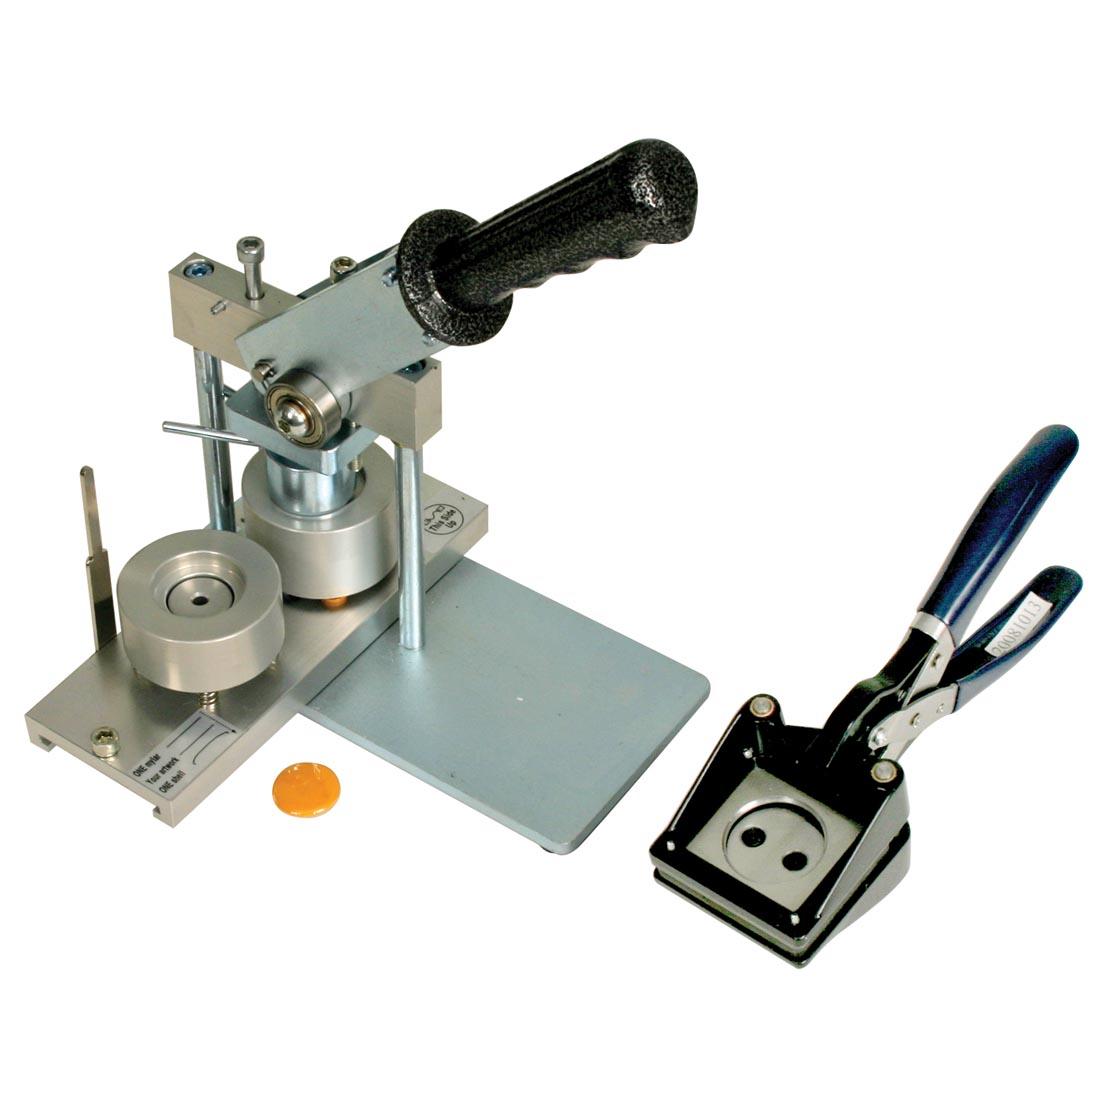 Neil Mini Model 1" Button Maker With Circle Punch